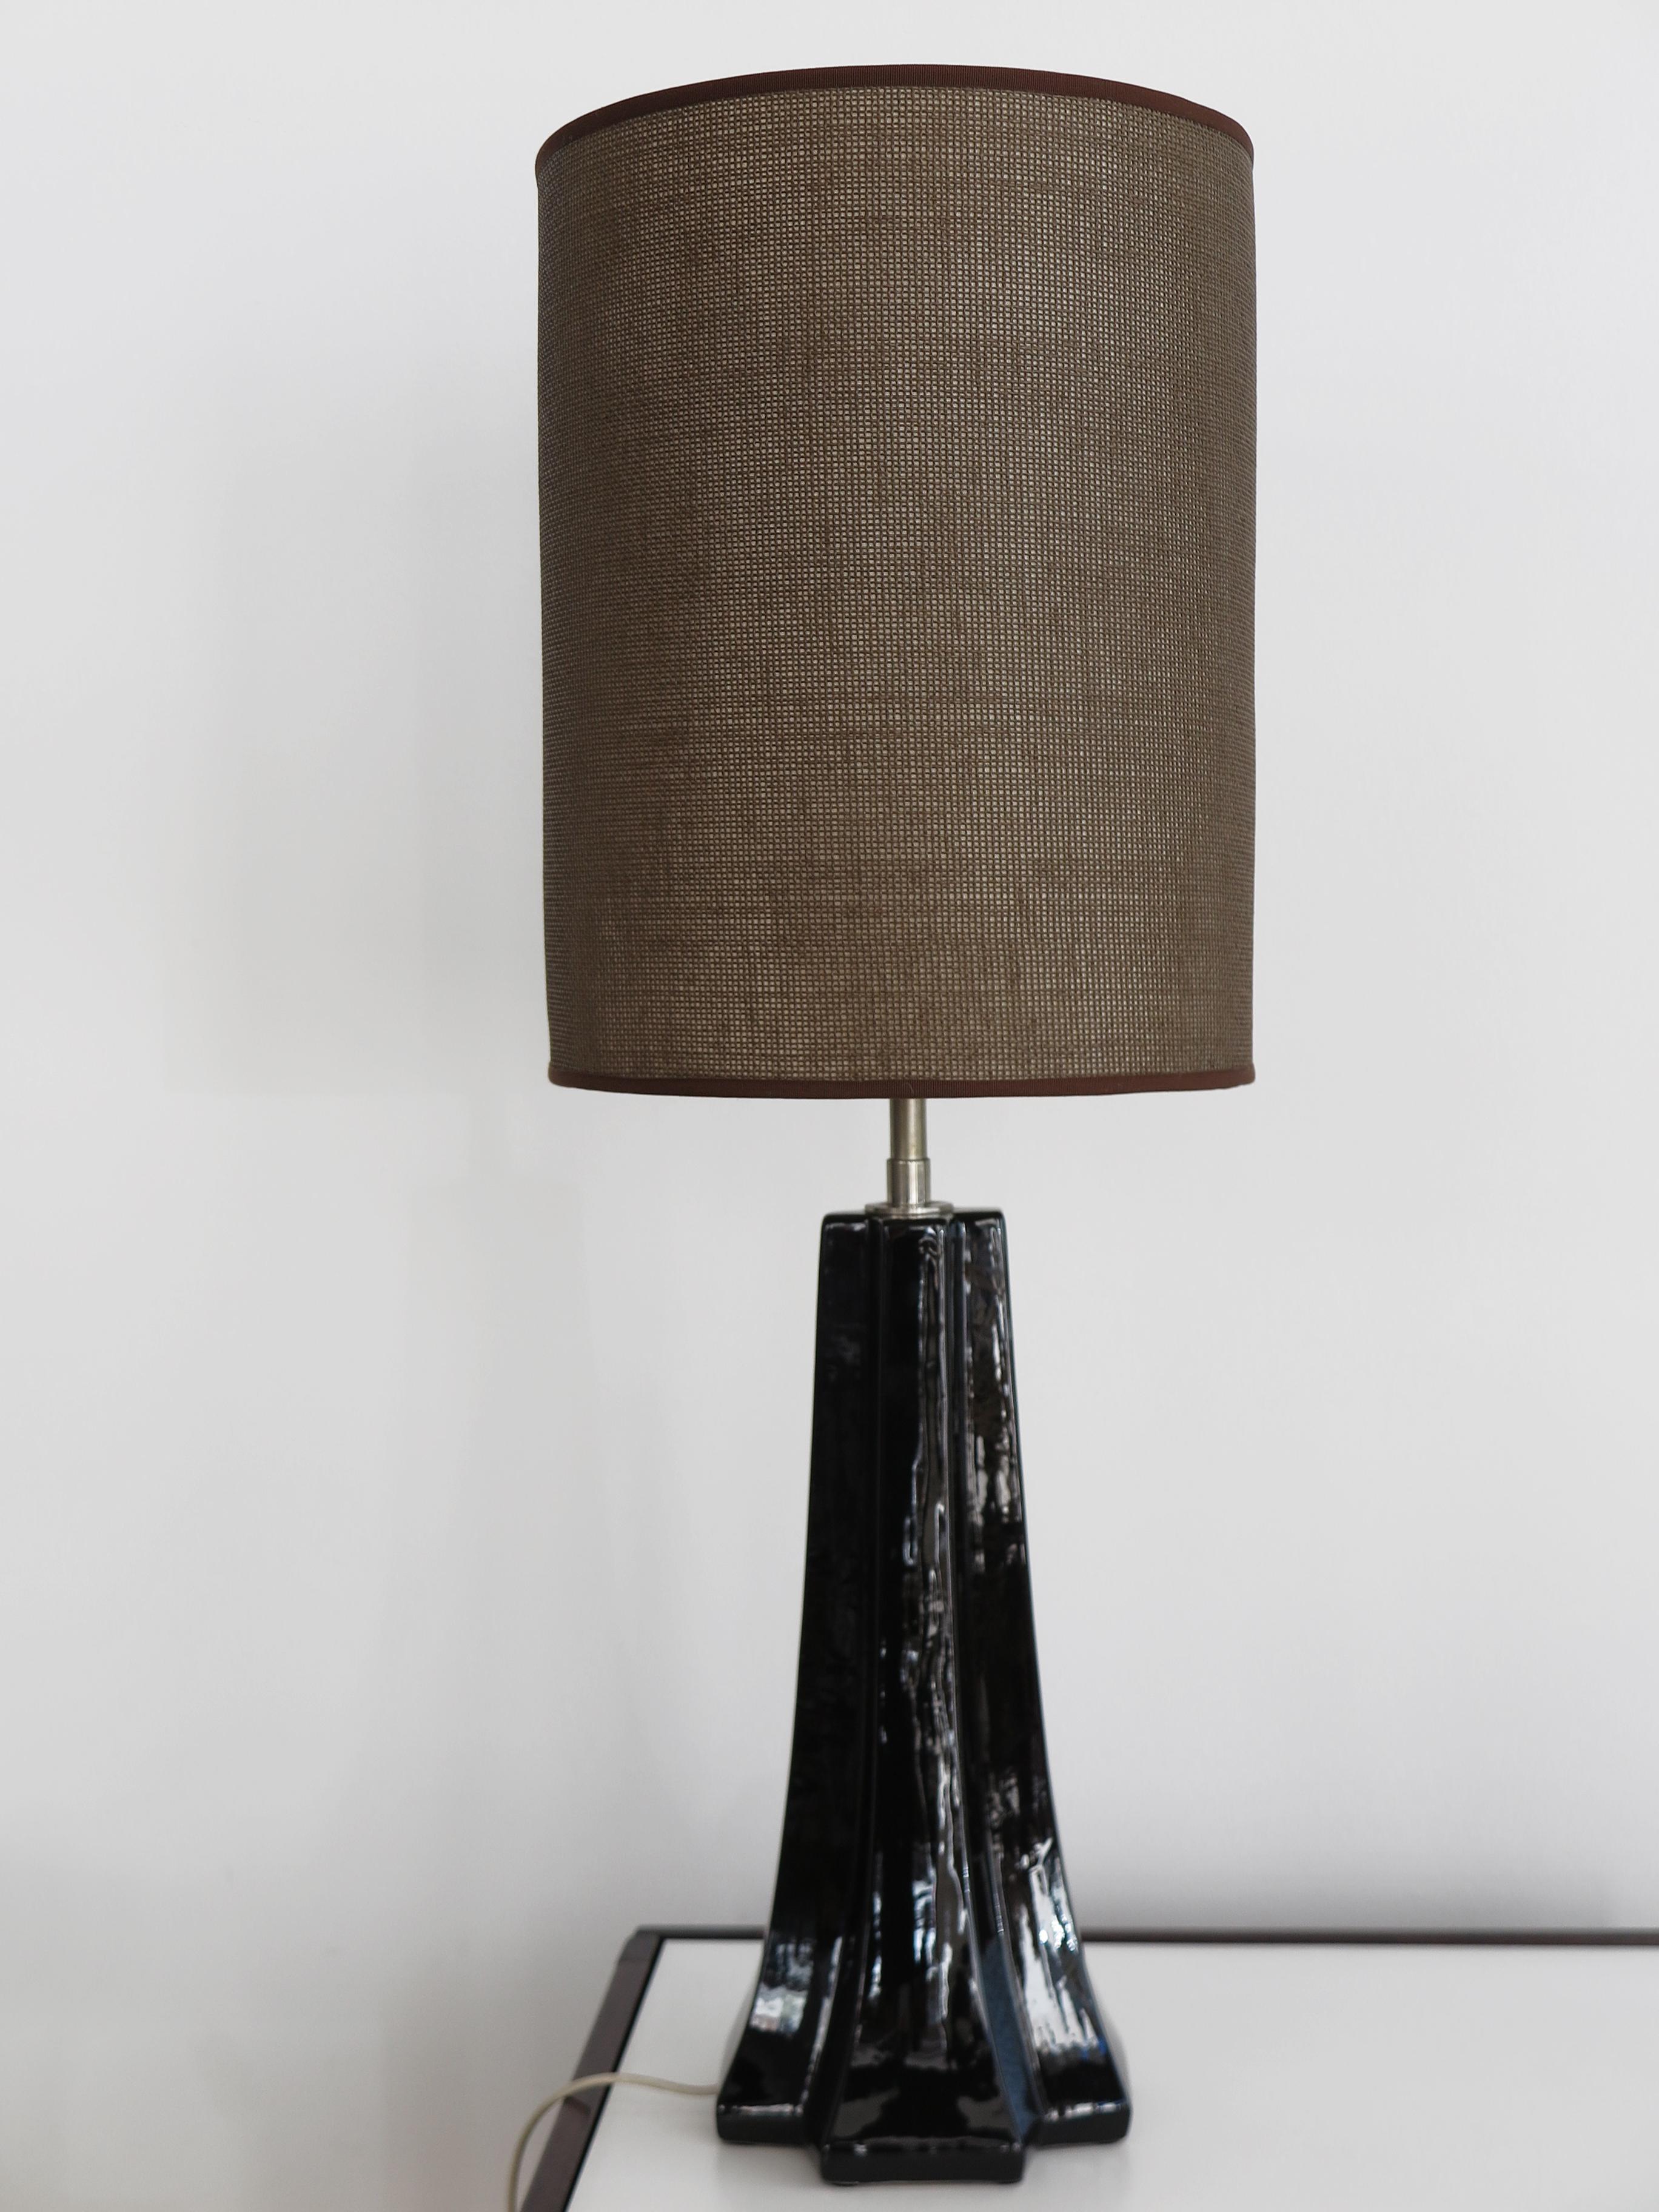 Italian Mid-Century Modern design large table lamp lampshade with double switch (only above - above and below) and with glossy black lacquered ceramic base and new fabric lampshade, Italy 1960.

Please note that the lamp is original of the period